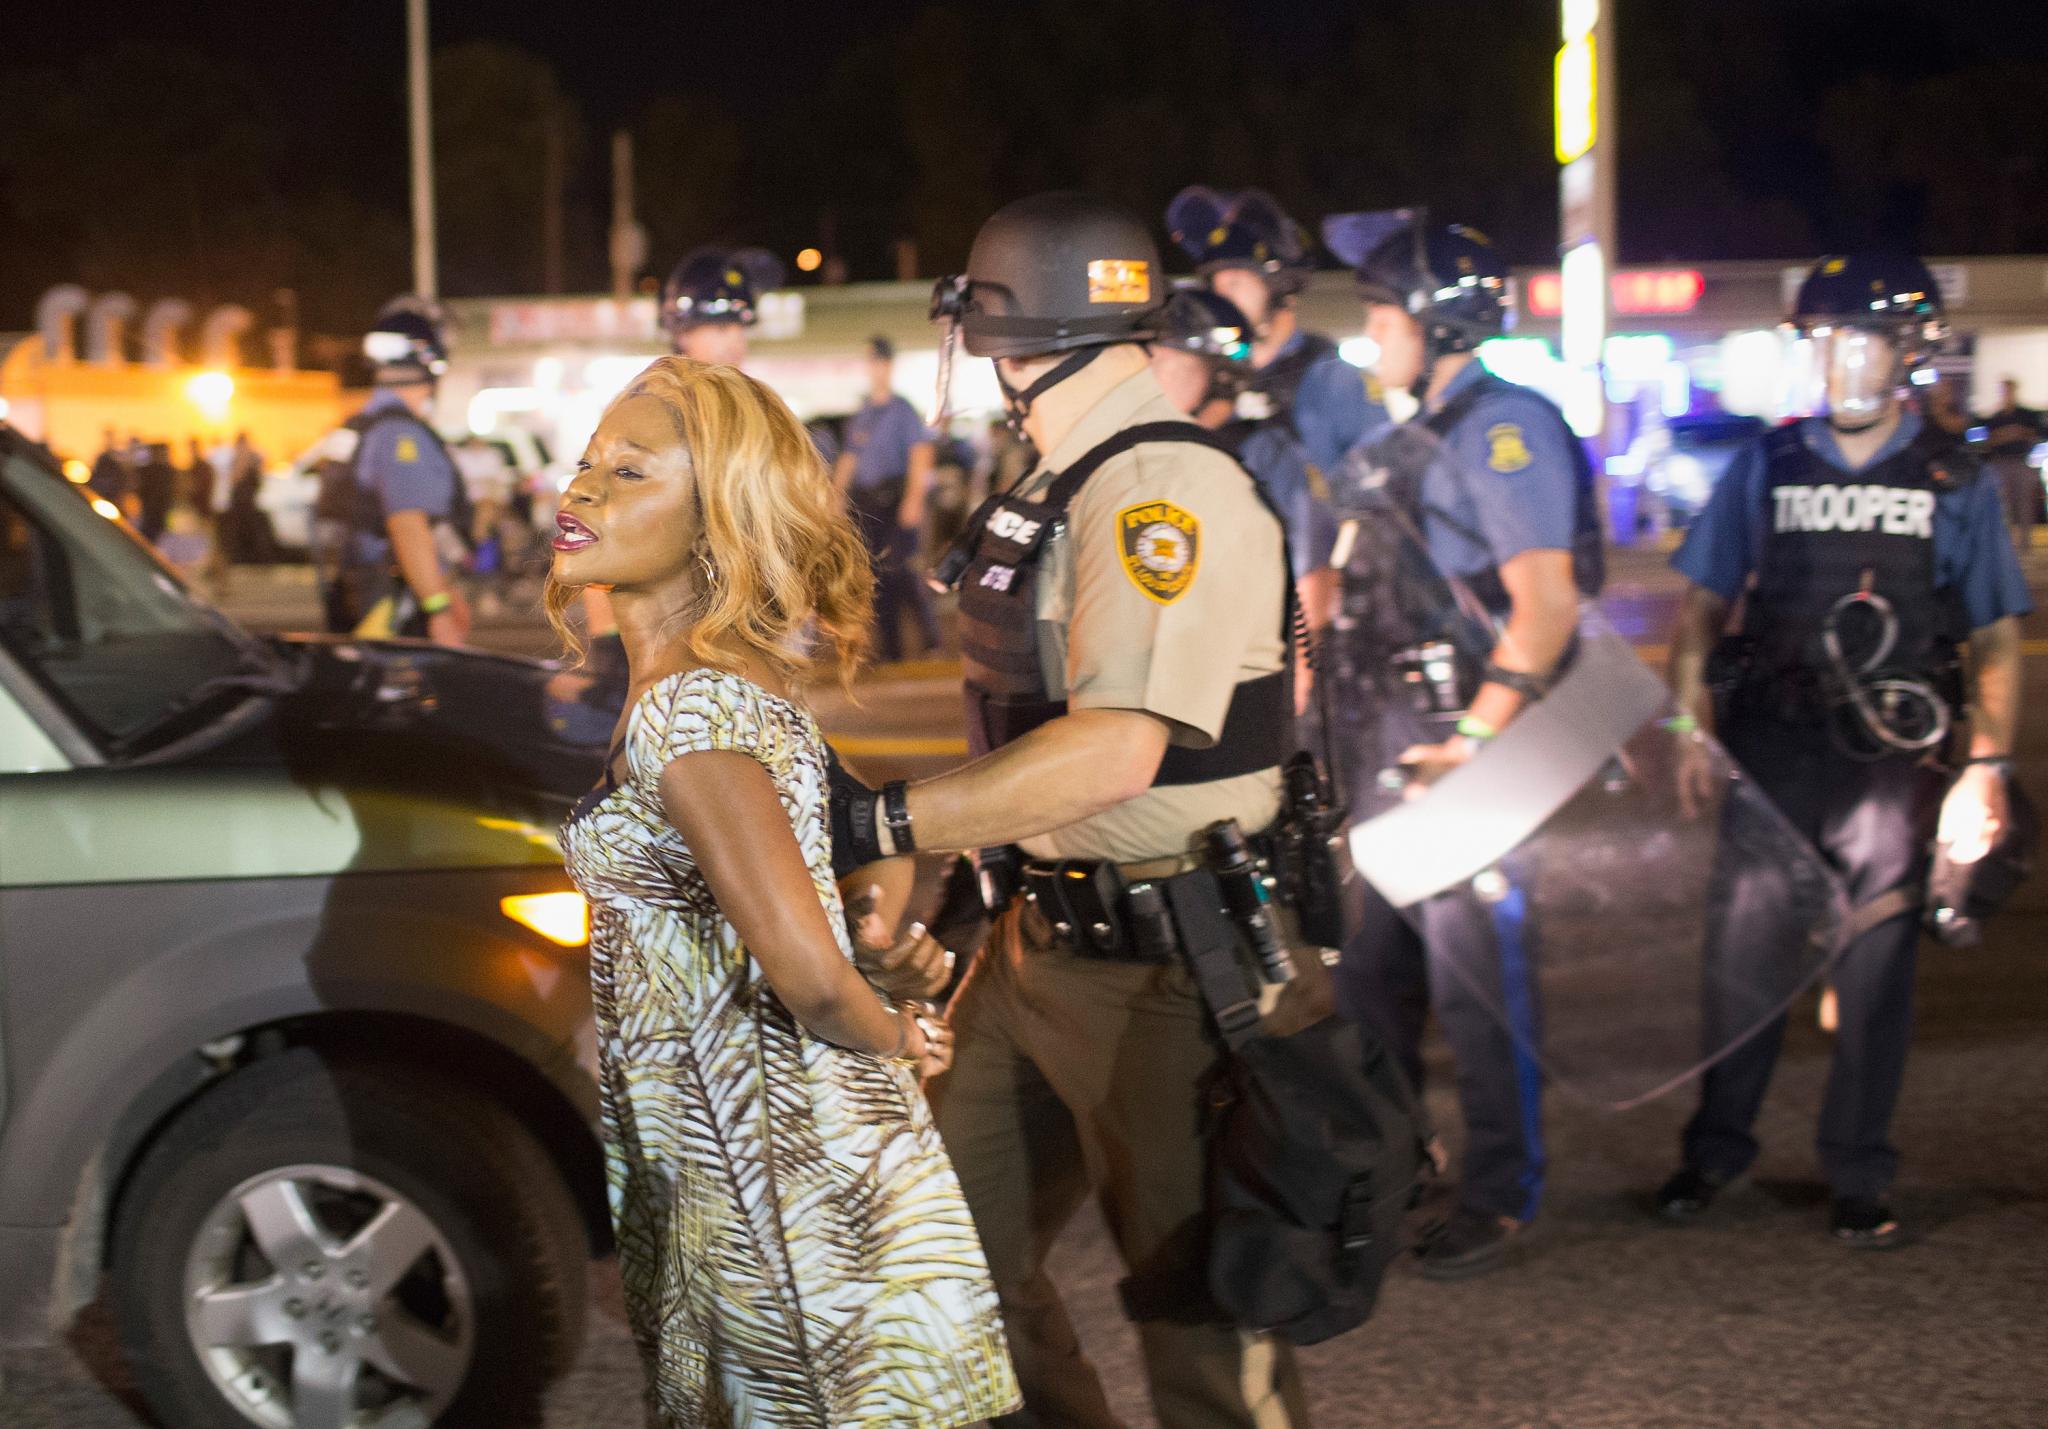 DOJ Report Says Lack of Communication Among St. Louis County Police Intensified Tensions in Ferguson